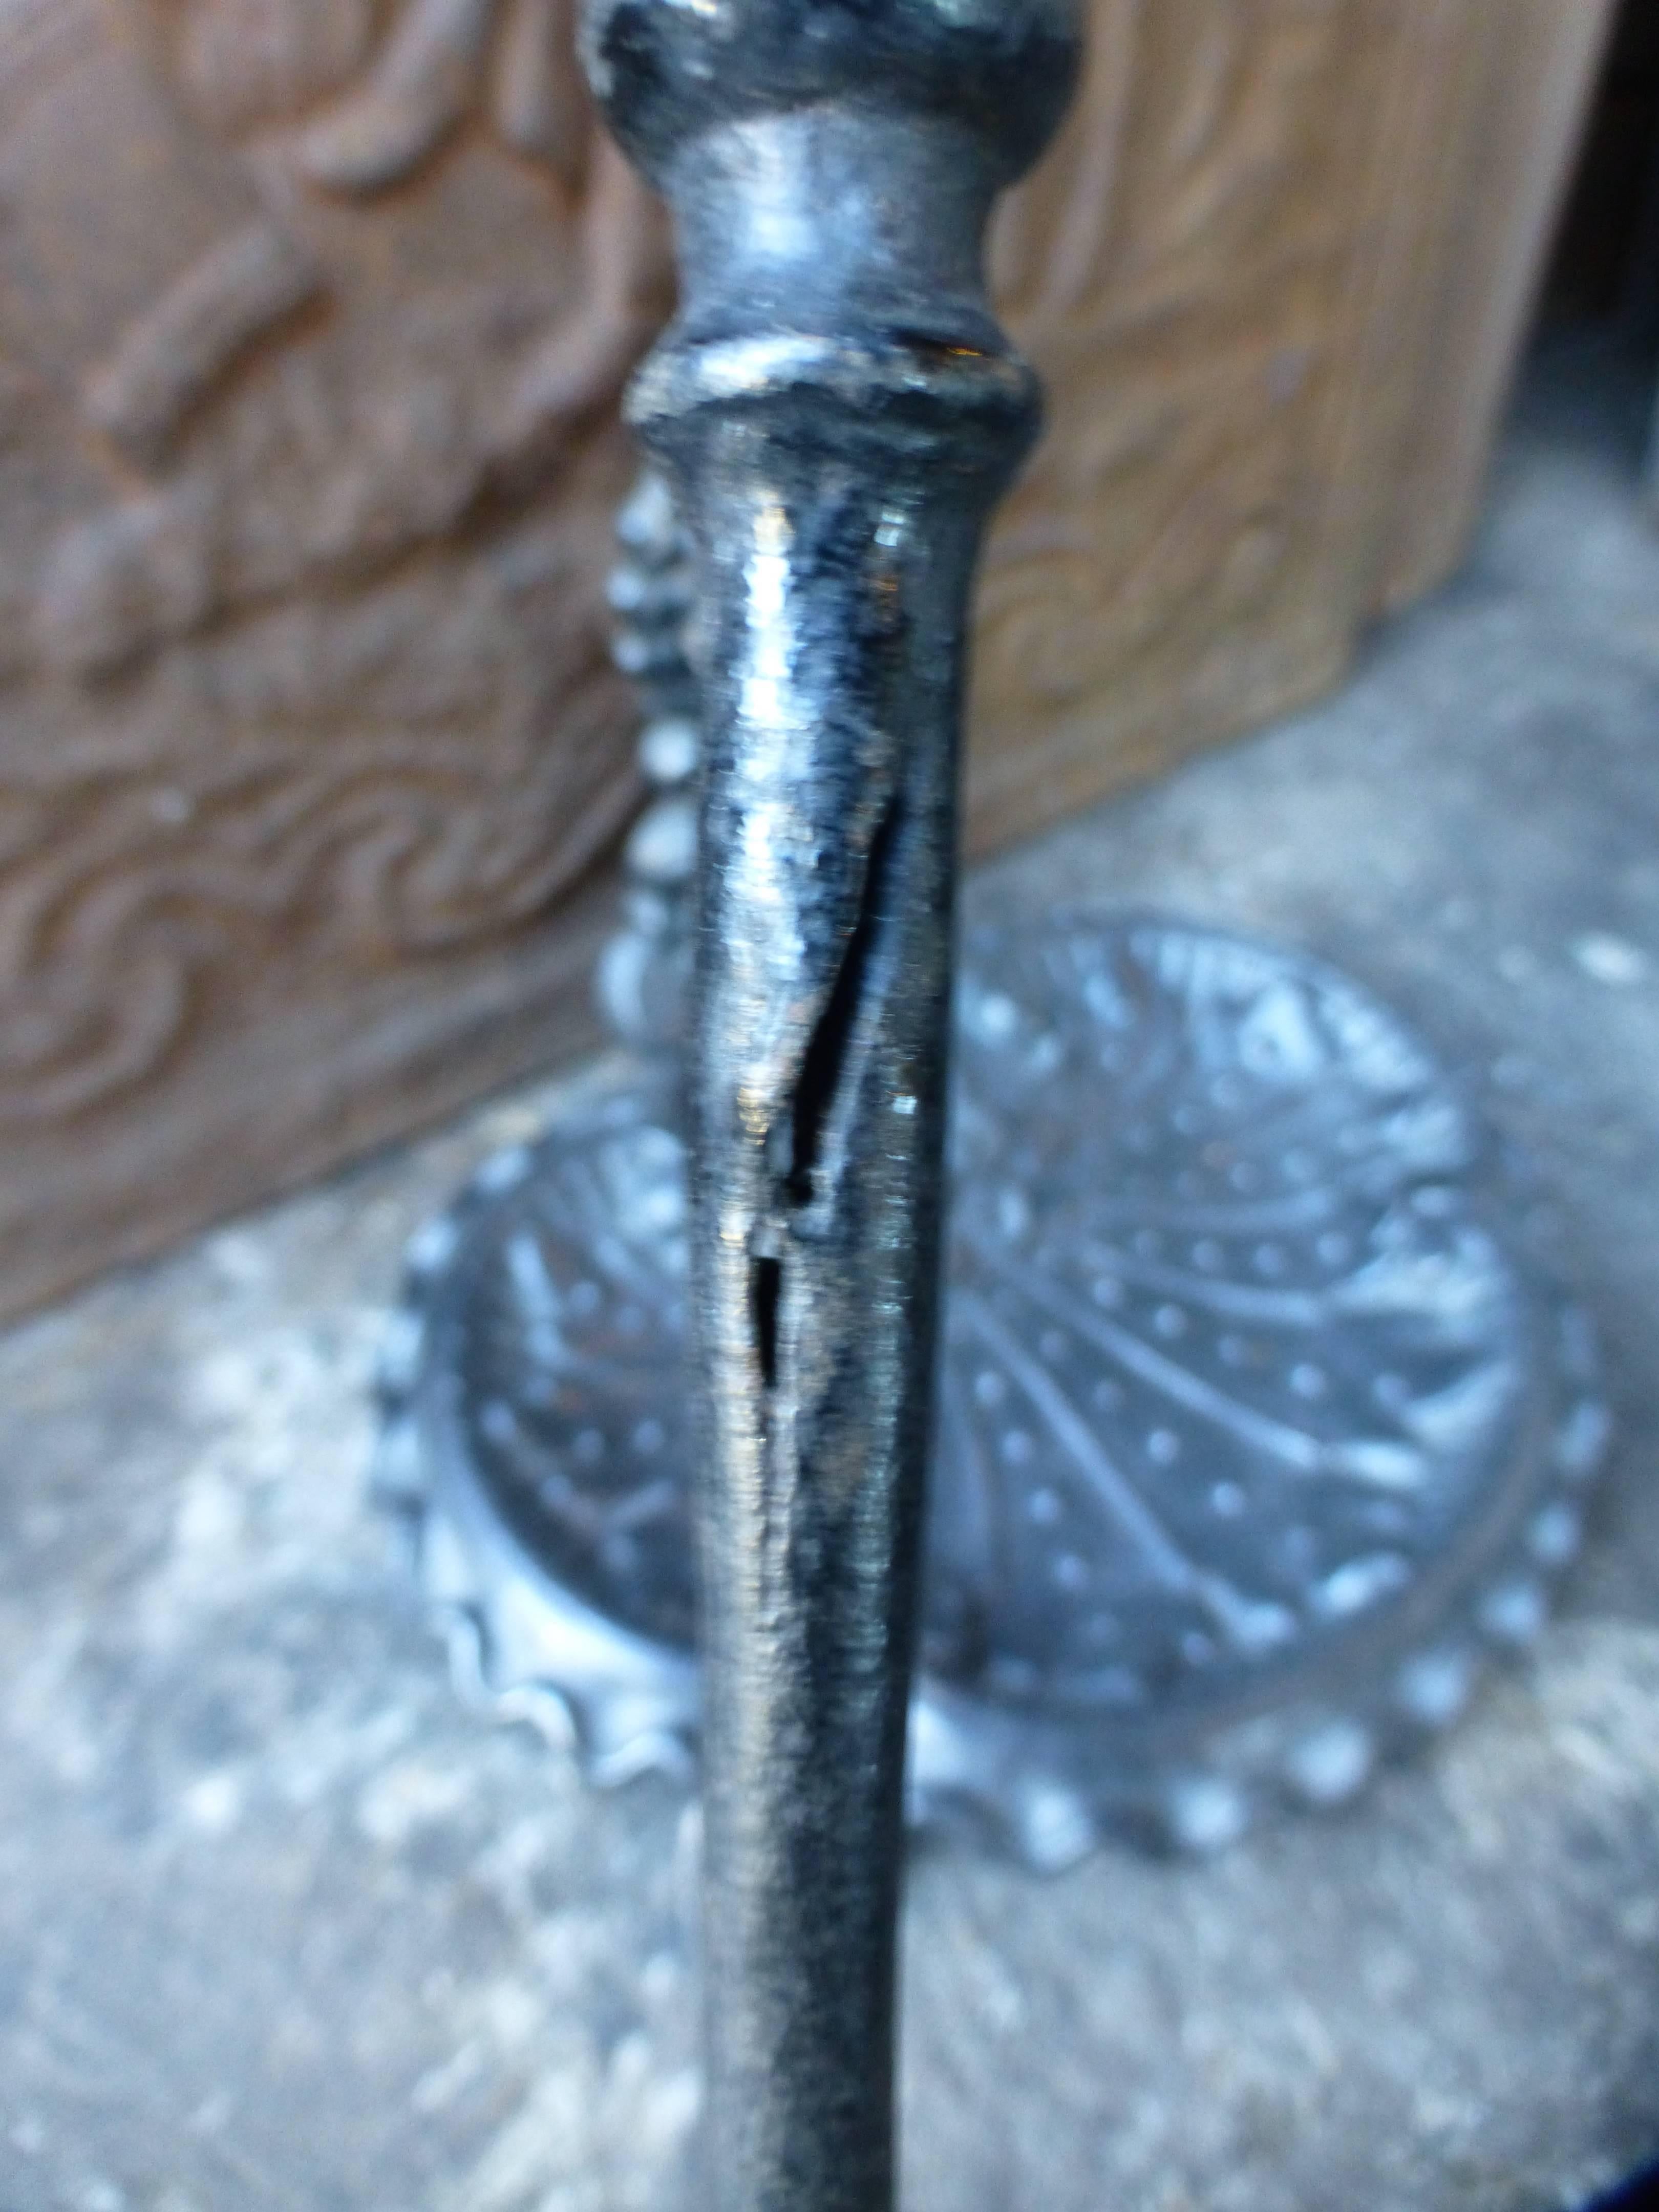 Forged Antique Fireplace Tools, Fire Irons  